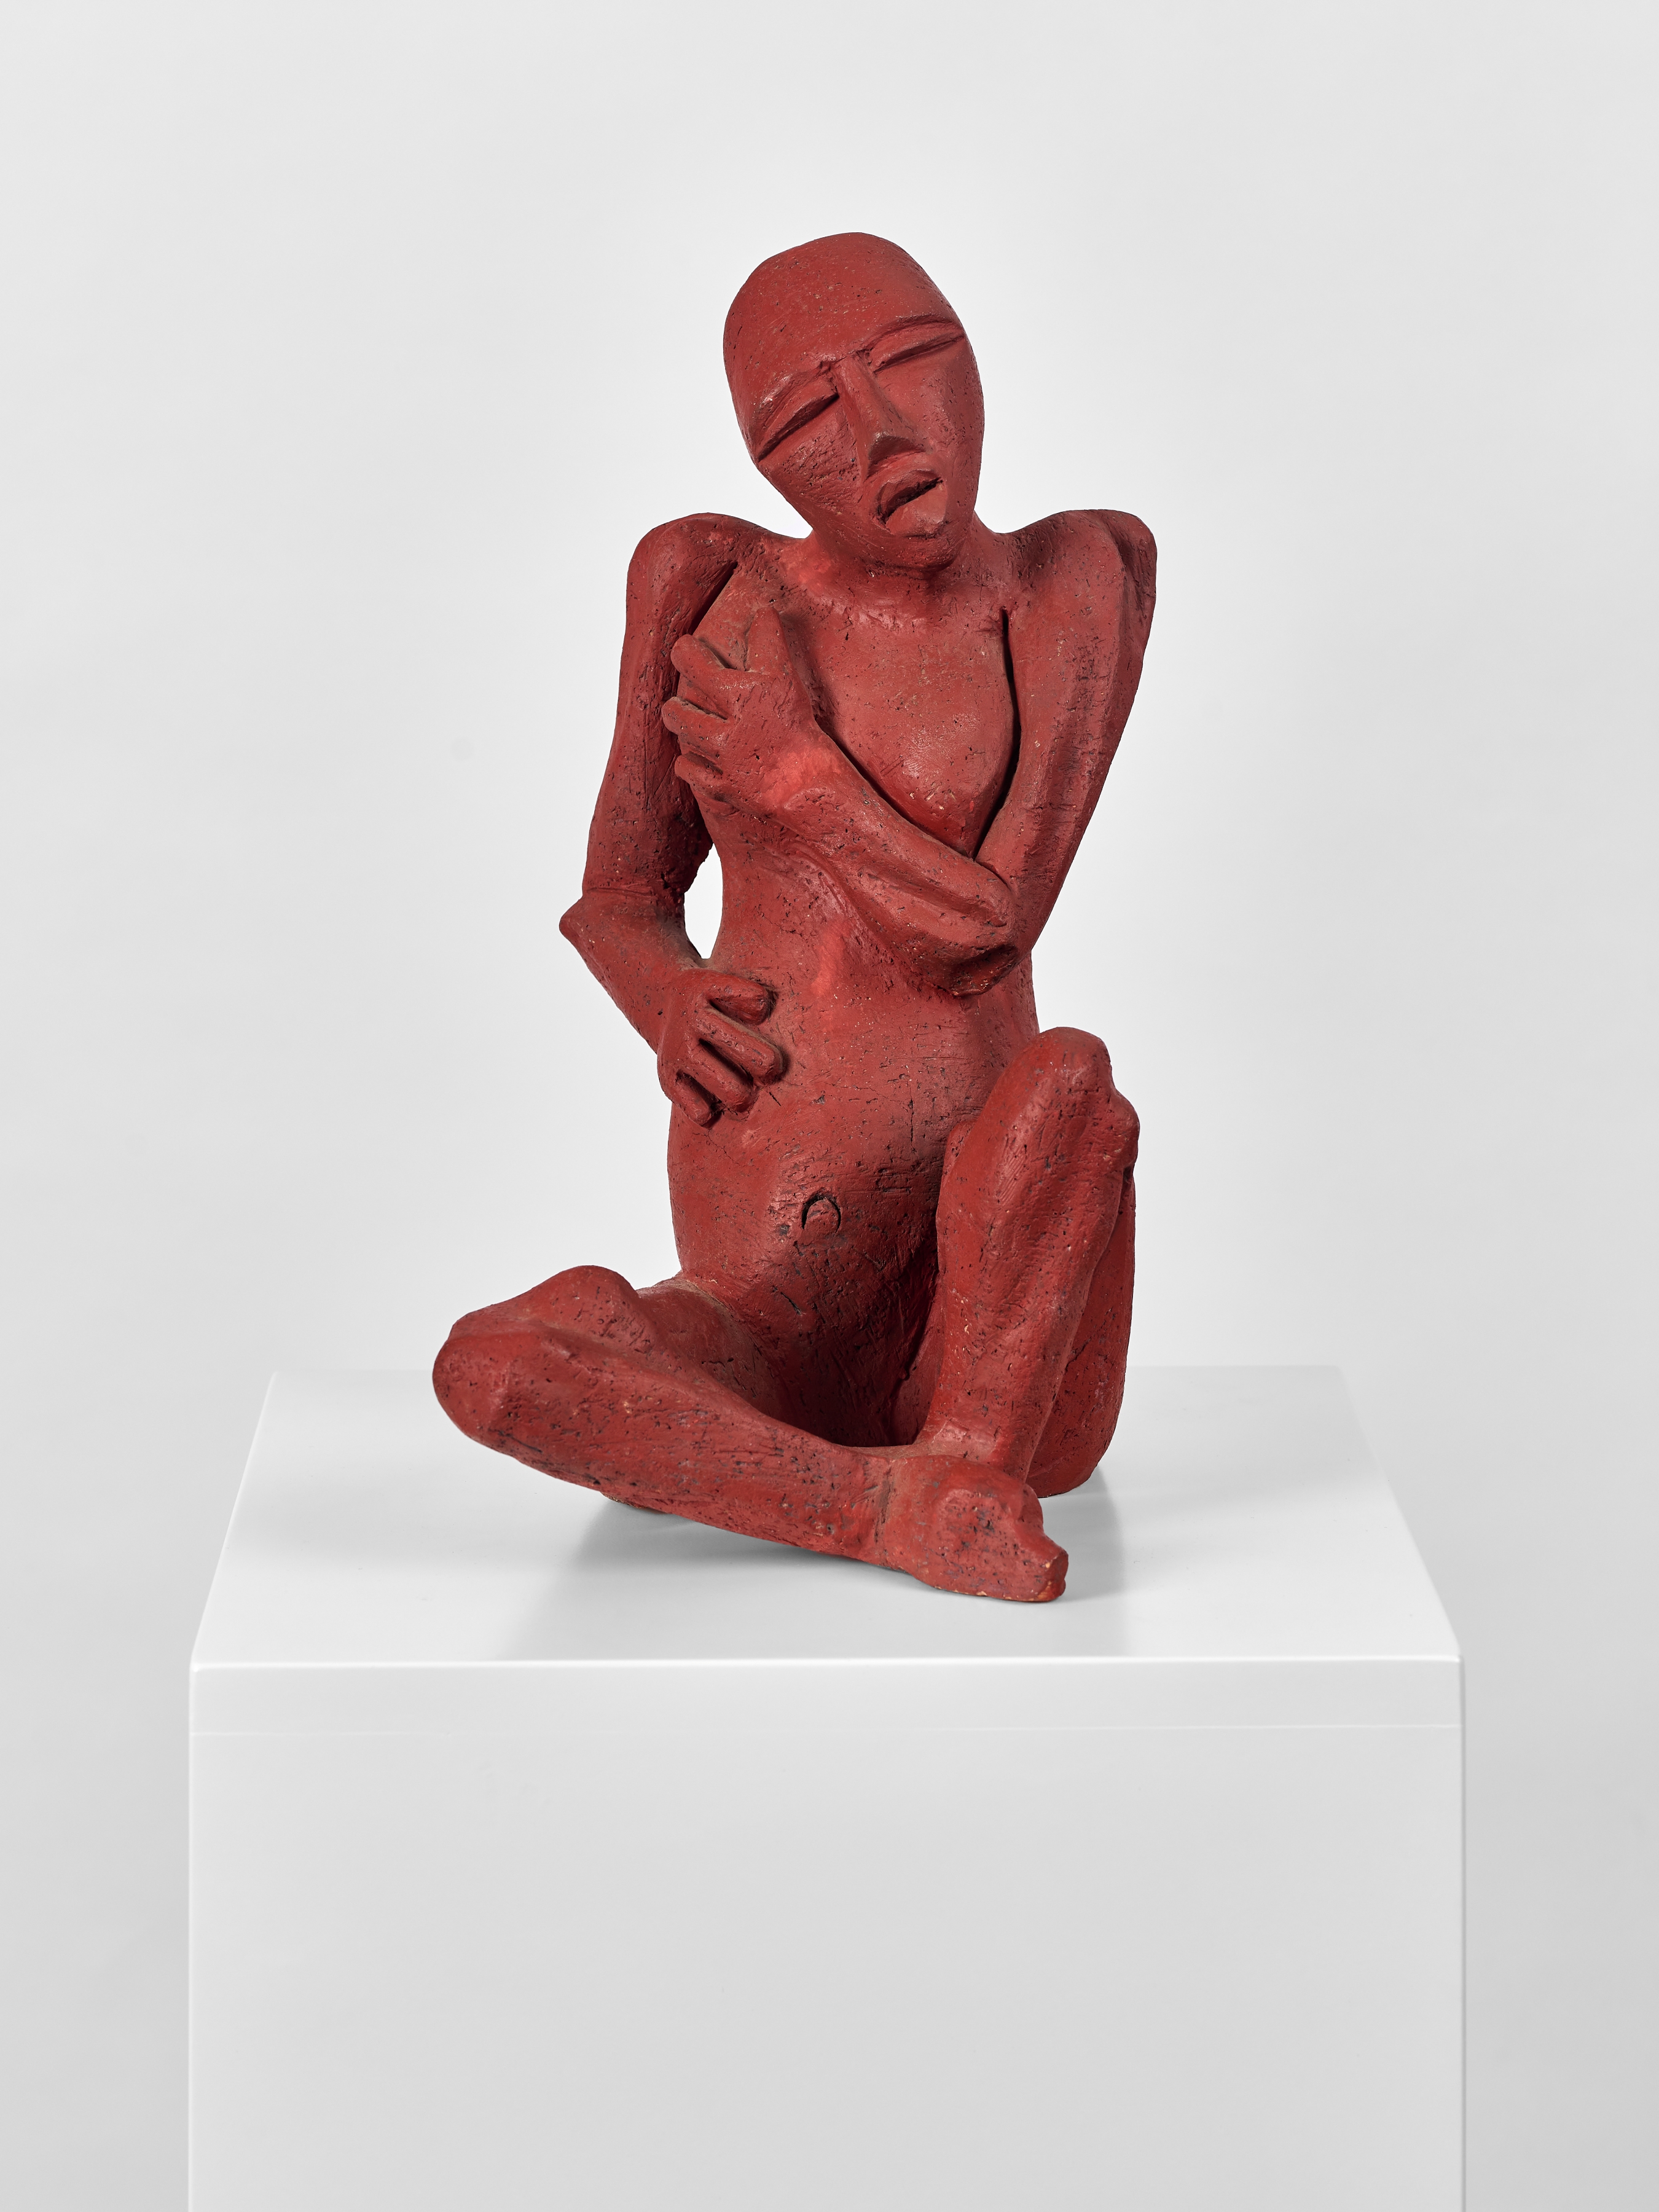 Dumile Feni

Untitled (Seated Woman), c. 1965

Terracotta

34 x 19.5 x 22 cm (13.4 x 7.5 x 8.7 in)

Enquire